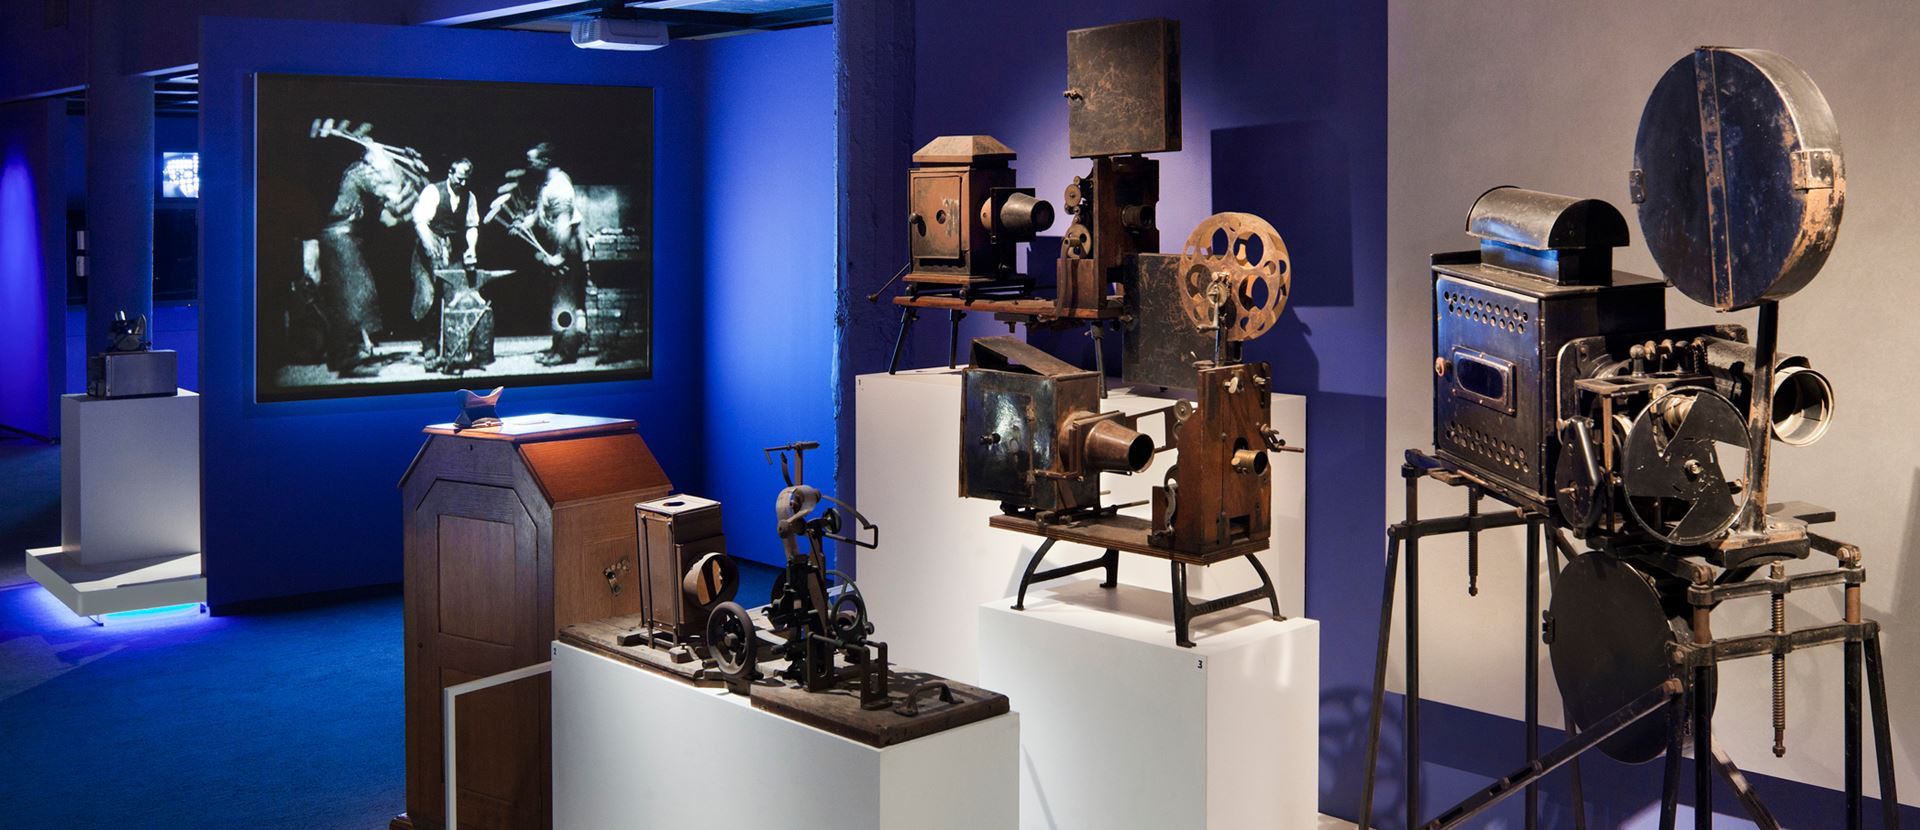 Image of 7 projectors in the Behind the Screen tour at the Museum of the Moving Image. The older projectors are rusty and on white platforms. A more modern projector hung from the ceiling projects a black and white film onto the wall of the dimly lit, blue-walled room.